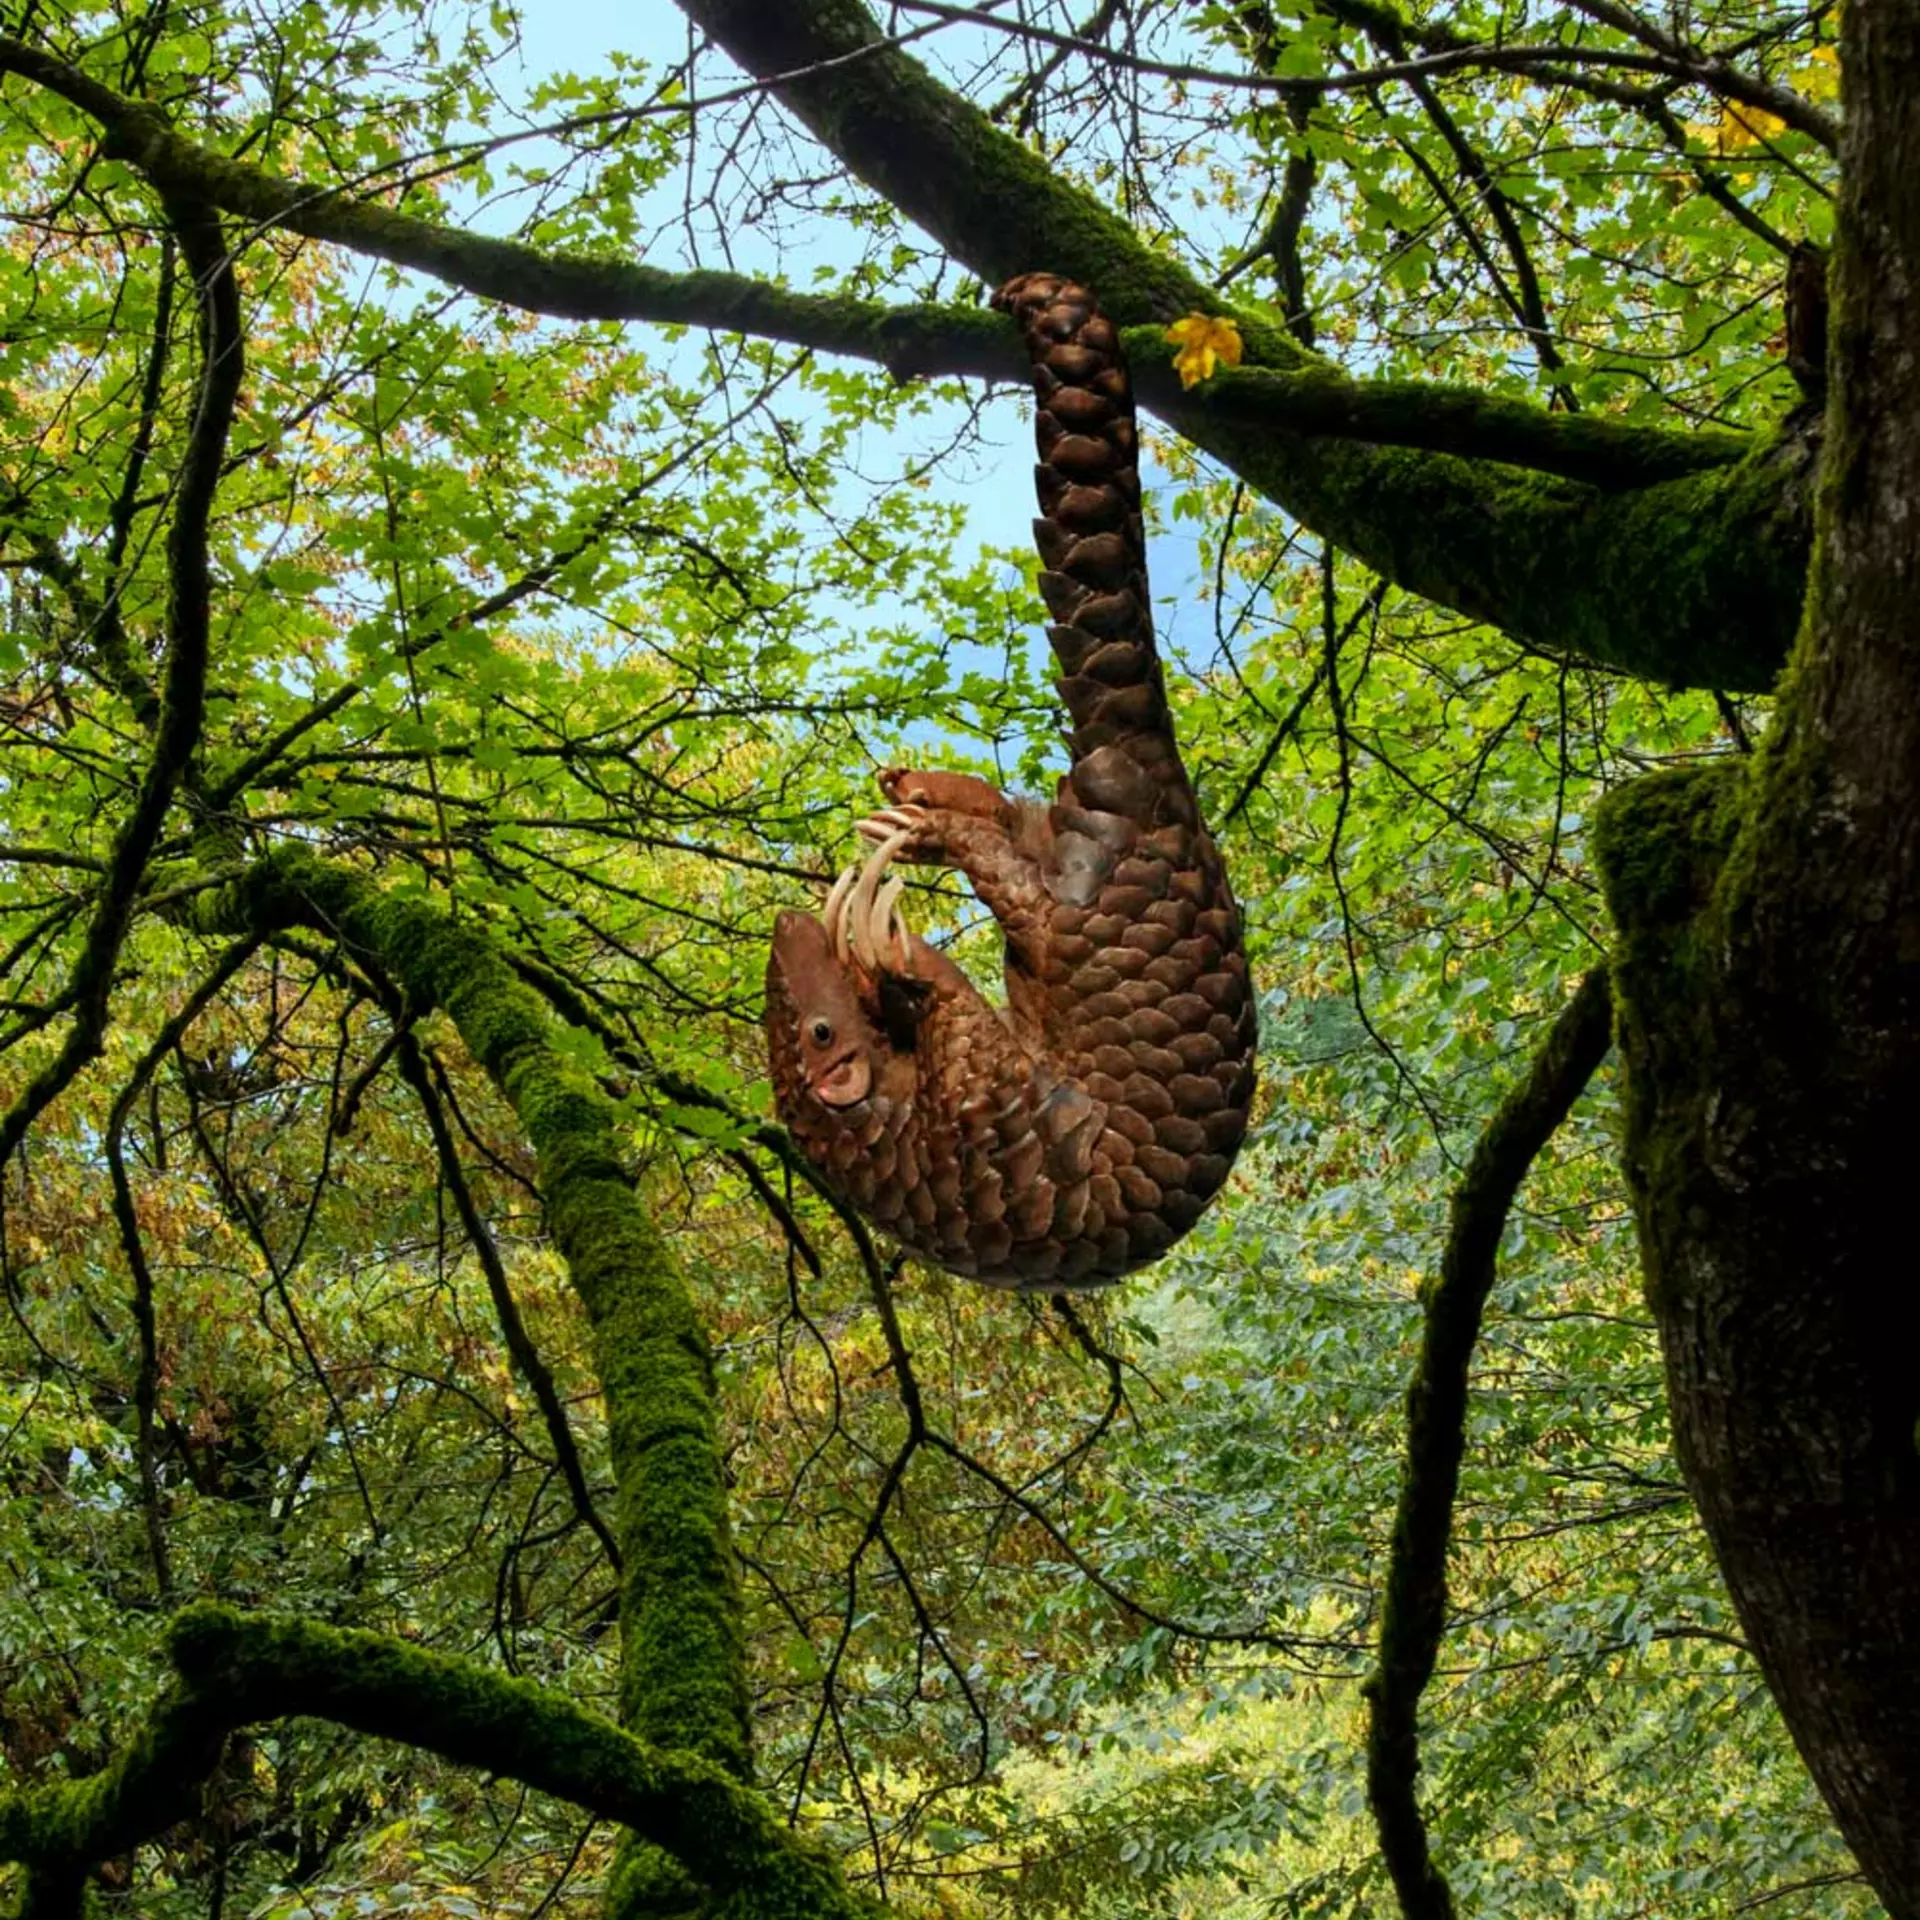 Pangolin hanging to tree by tail in mossy forest 